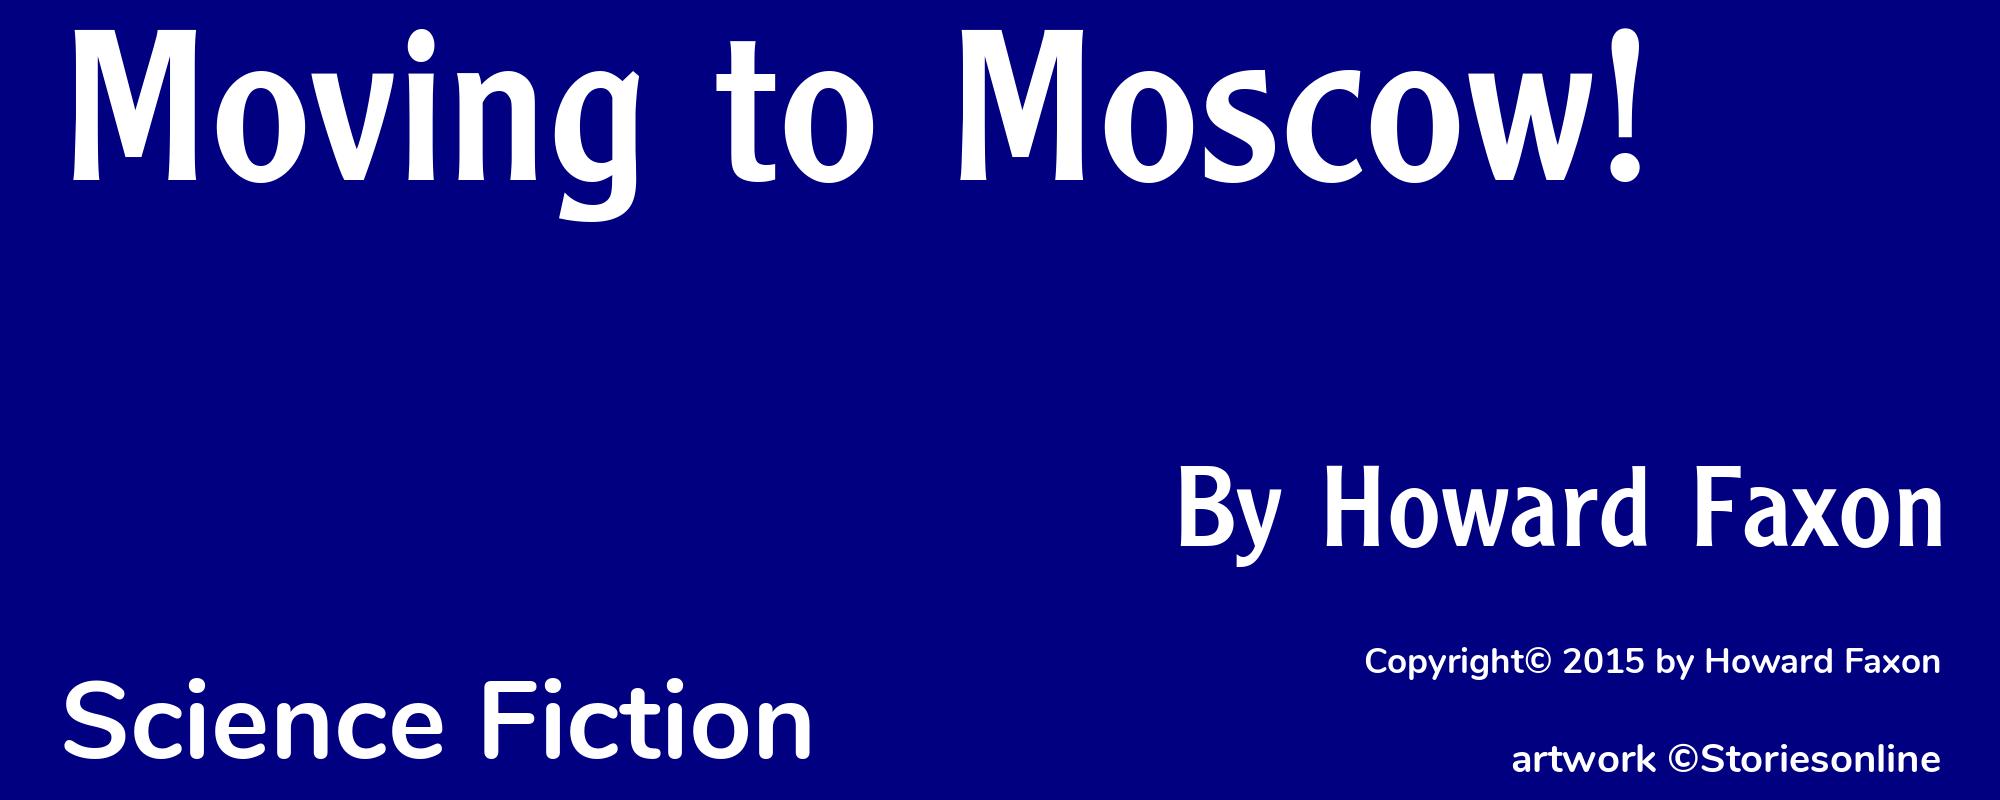 Moving to Moscow! - Cover